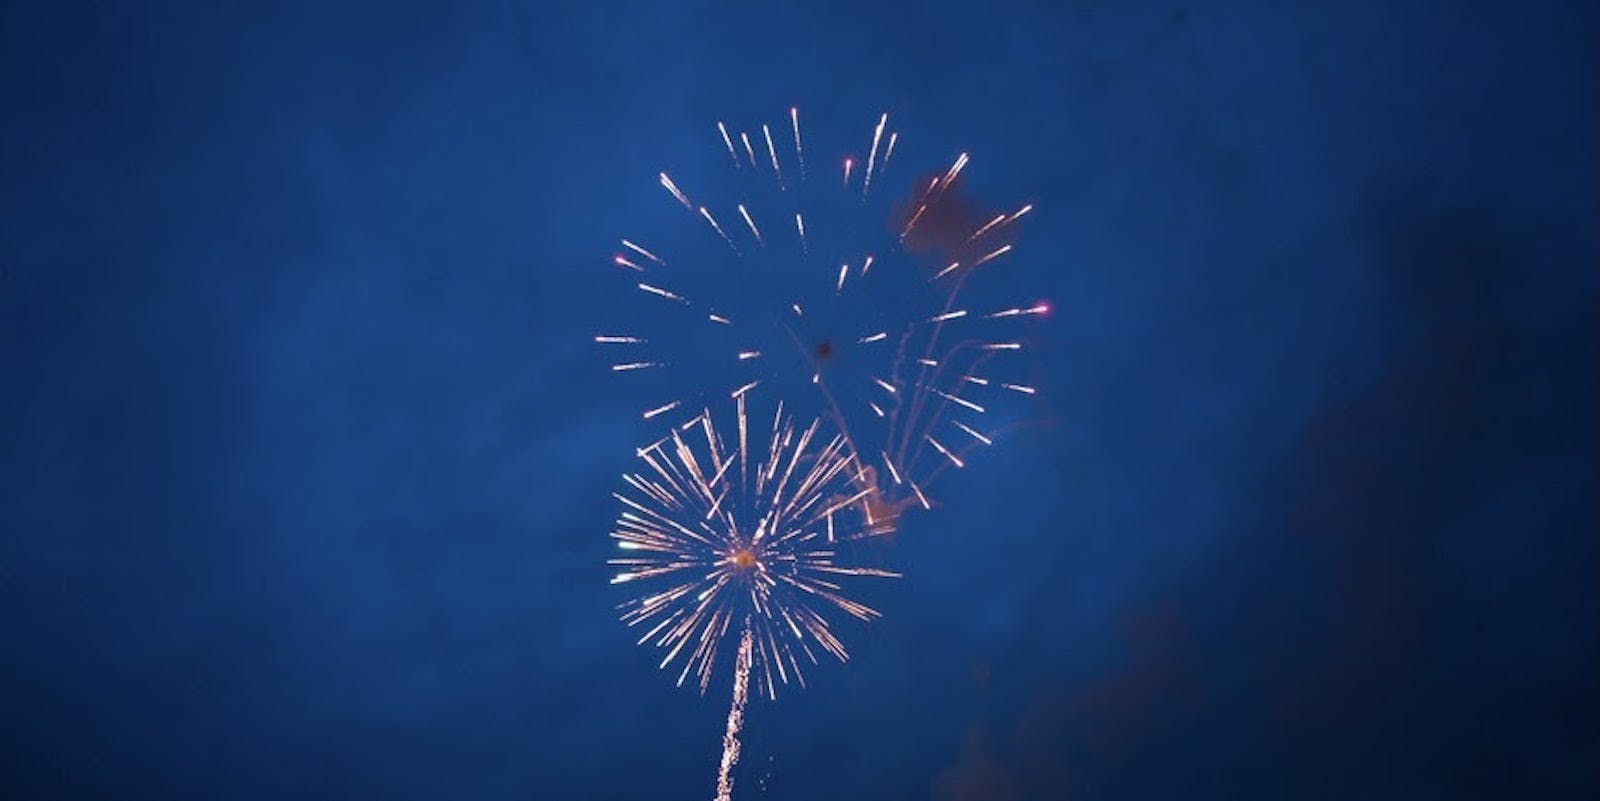 A photograph of a dark blue sky with two fireworks mid-explosion at center.